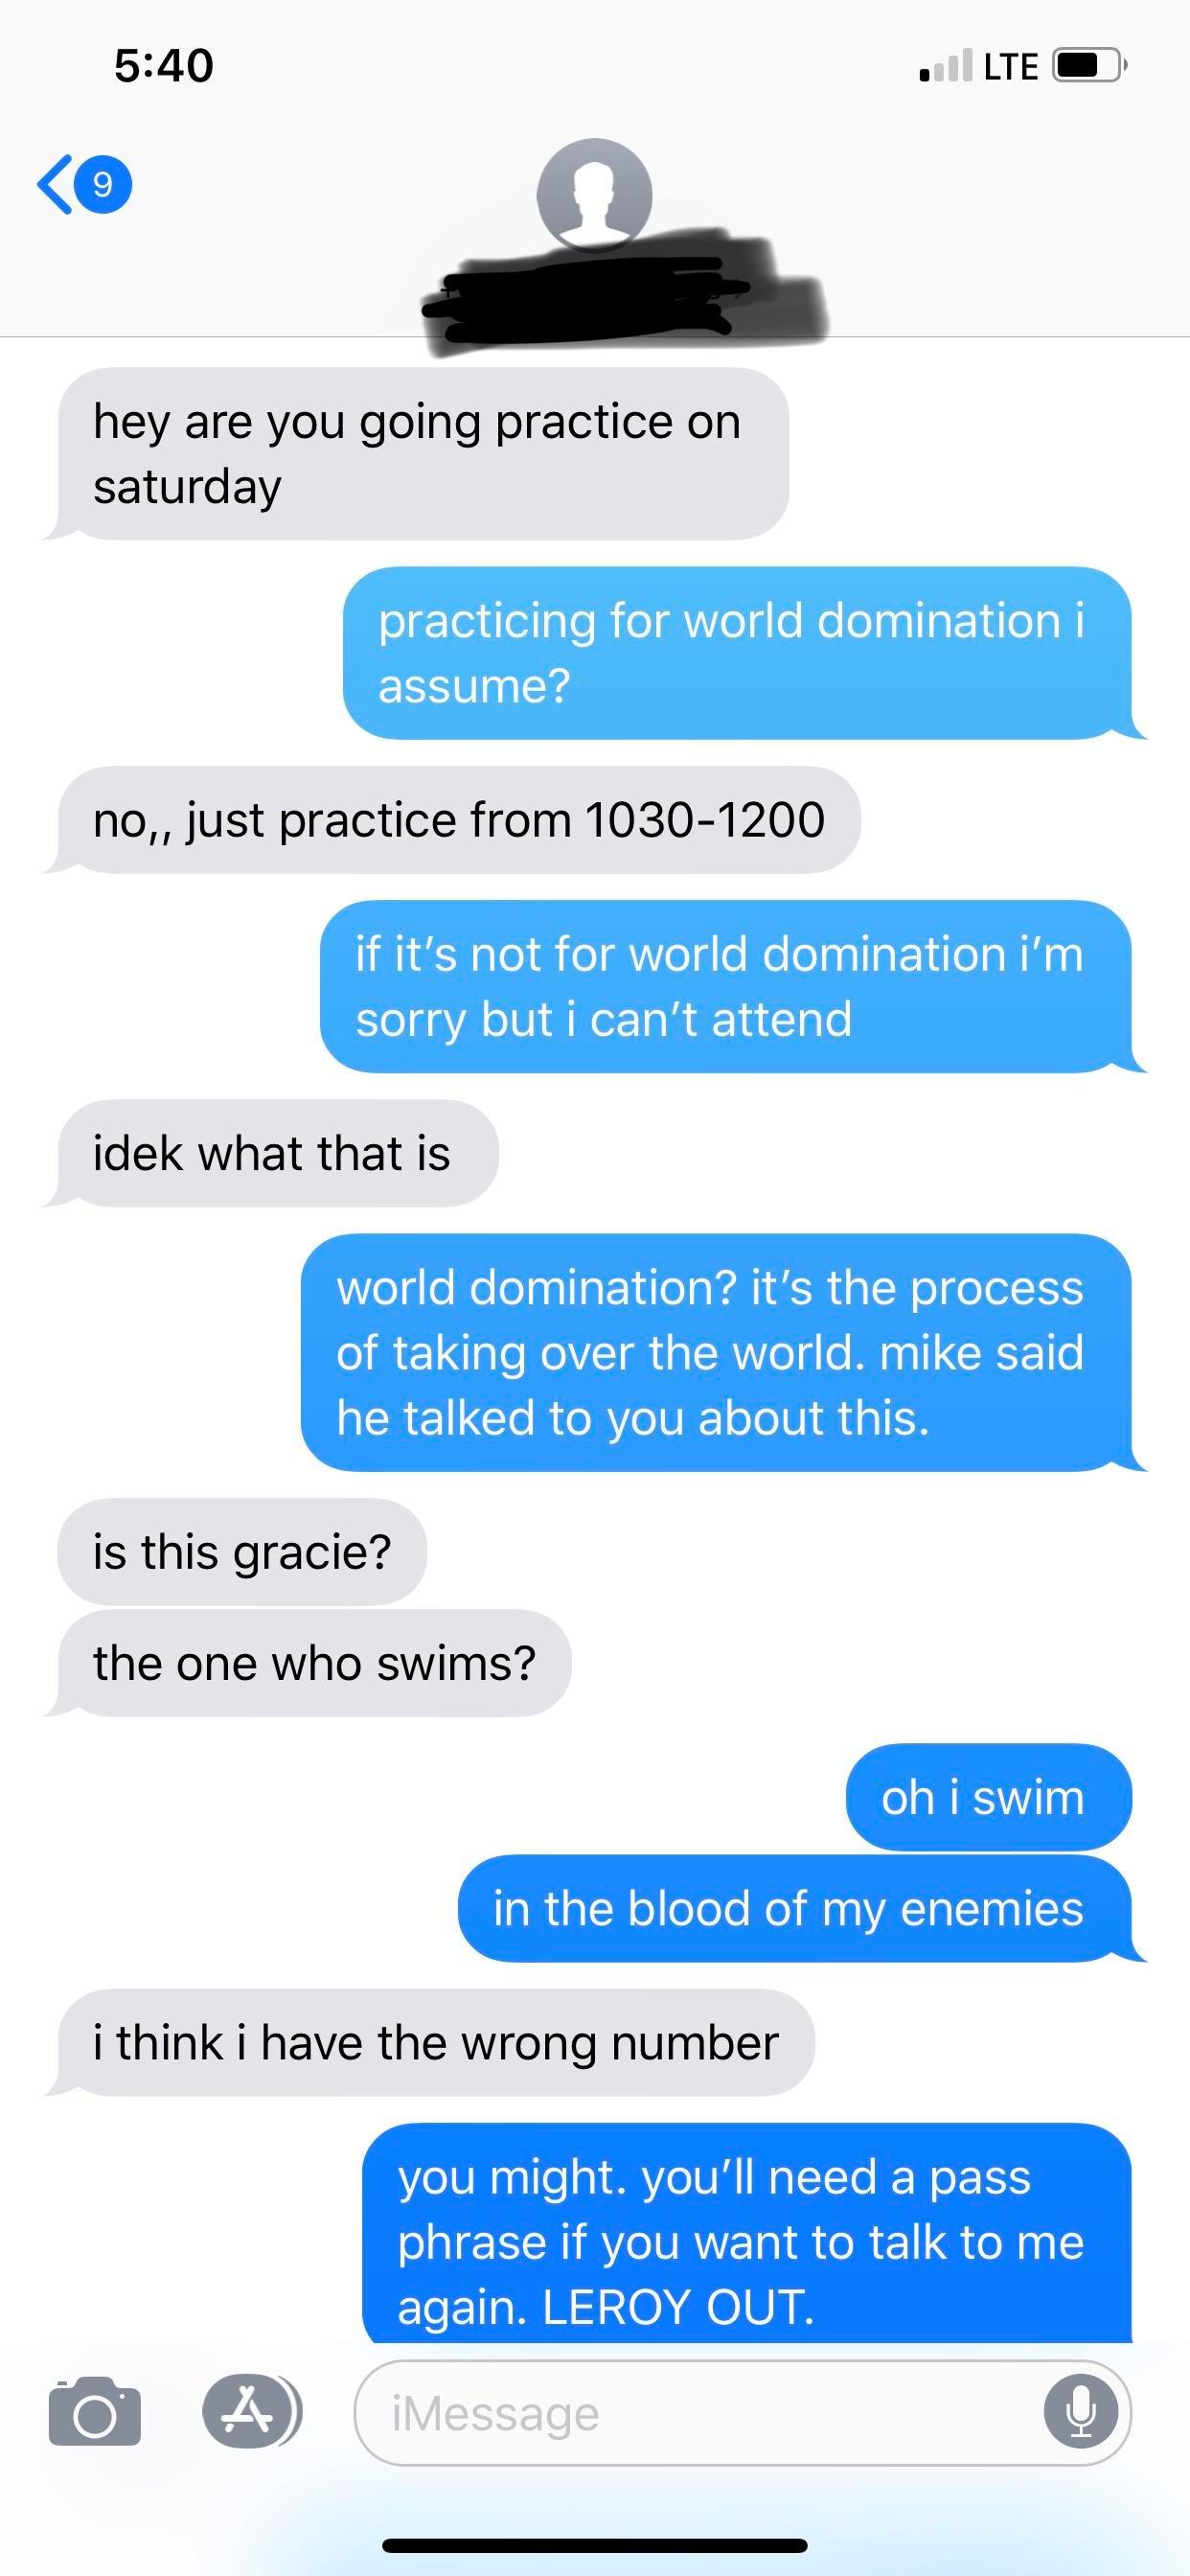 wrong number horse selling meme - Lte O hey are you going practice on saturday practicing for world domination i assume? no,, just practice from 10301200 if it's not for world domination i'm sorry but i can't attend idek what that is world domination? it'